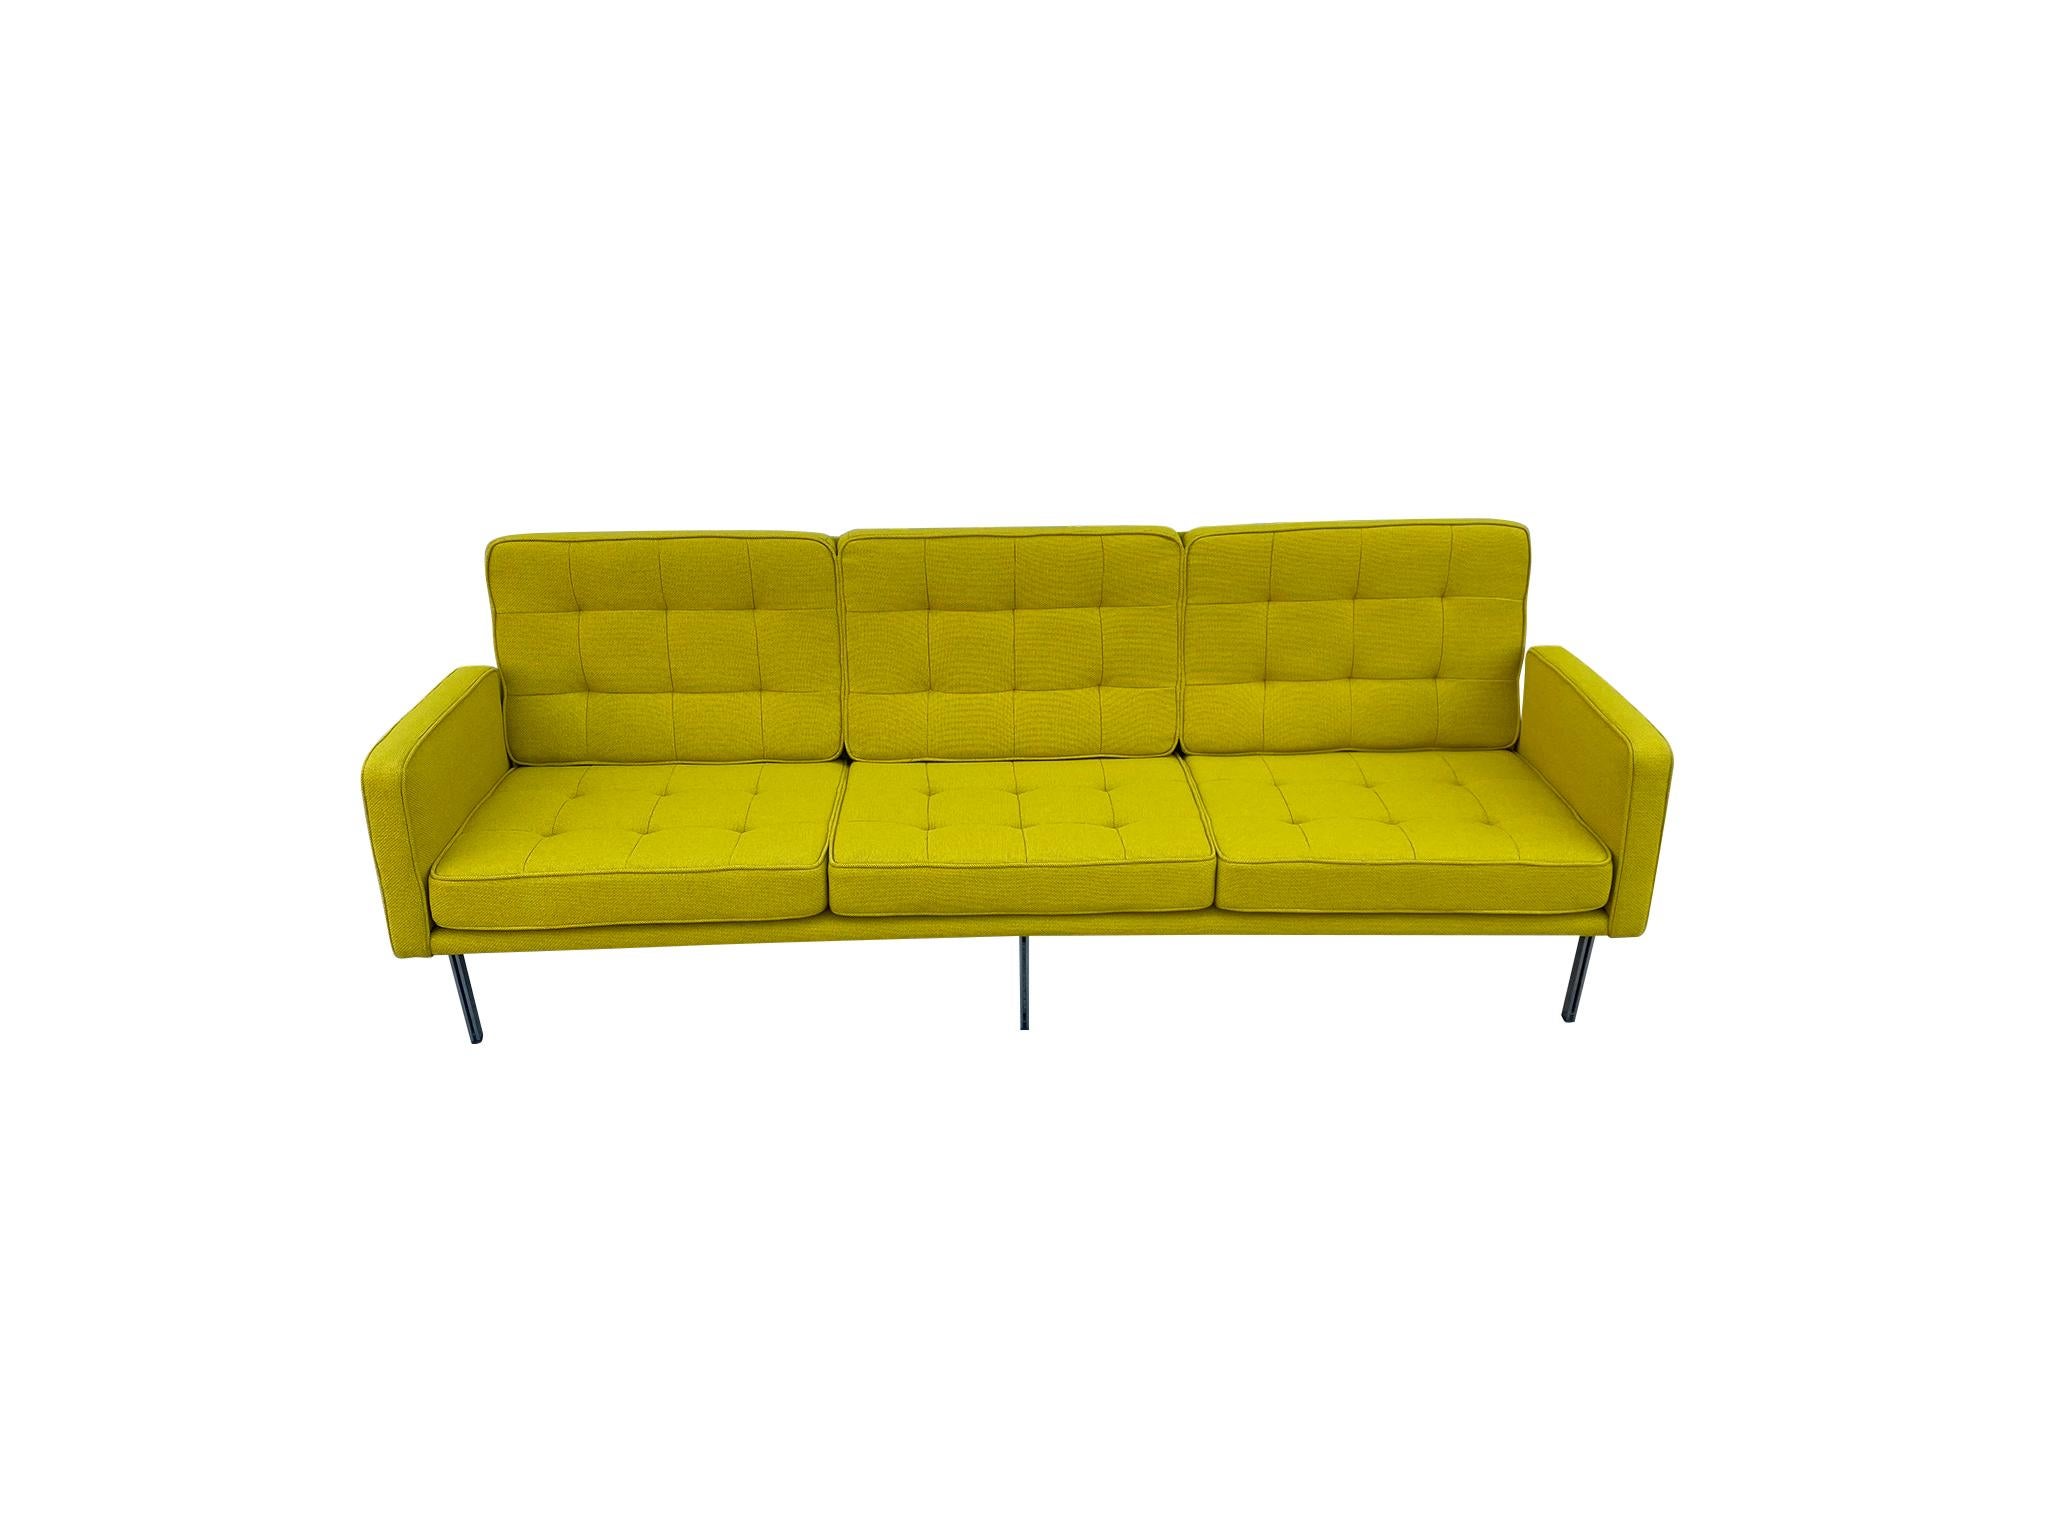 Midcentury Florence Knoll Sofa #57 Parallel Bar System Newly Restored 5